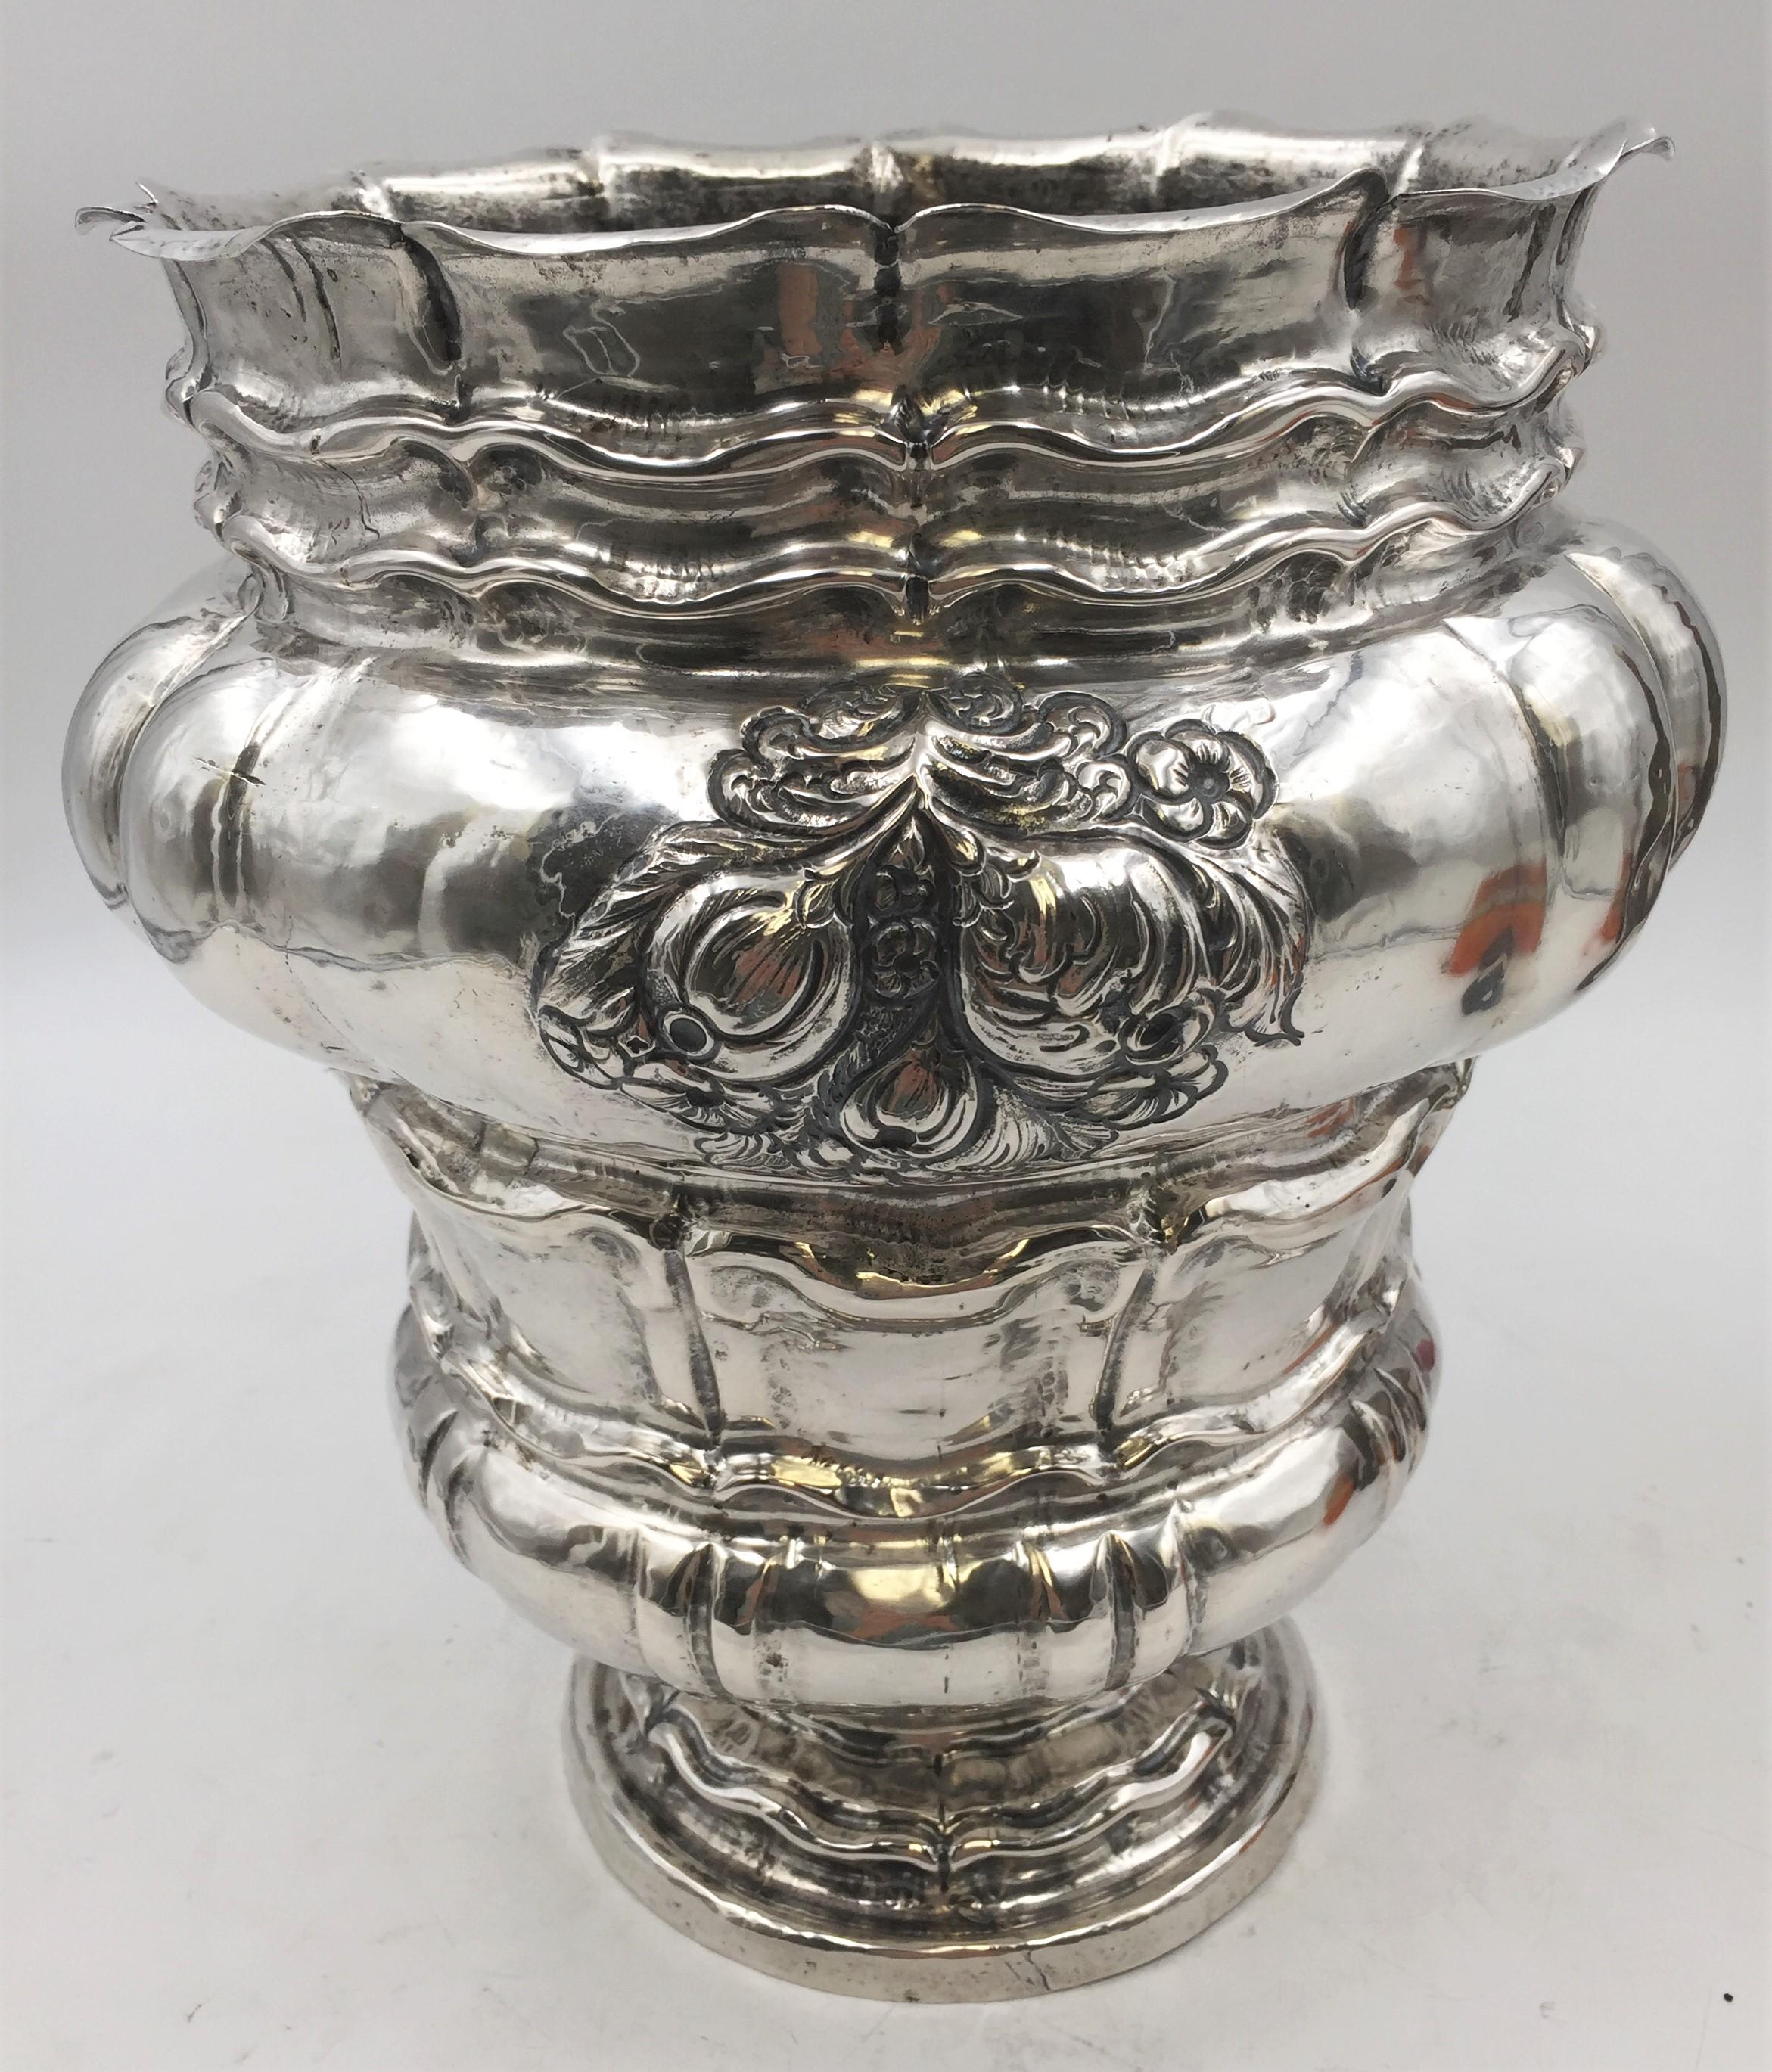 Continental silver wine cooler or vase, probably from the 19th century, with ornate floral and twirling motifs. It measures 11 1/8'' in height by 8 1/2'' in diameter at the top (10 1/2'' at the widest point approximately), weighs 42.5 ozt, and bears